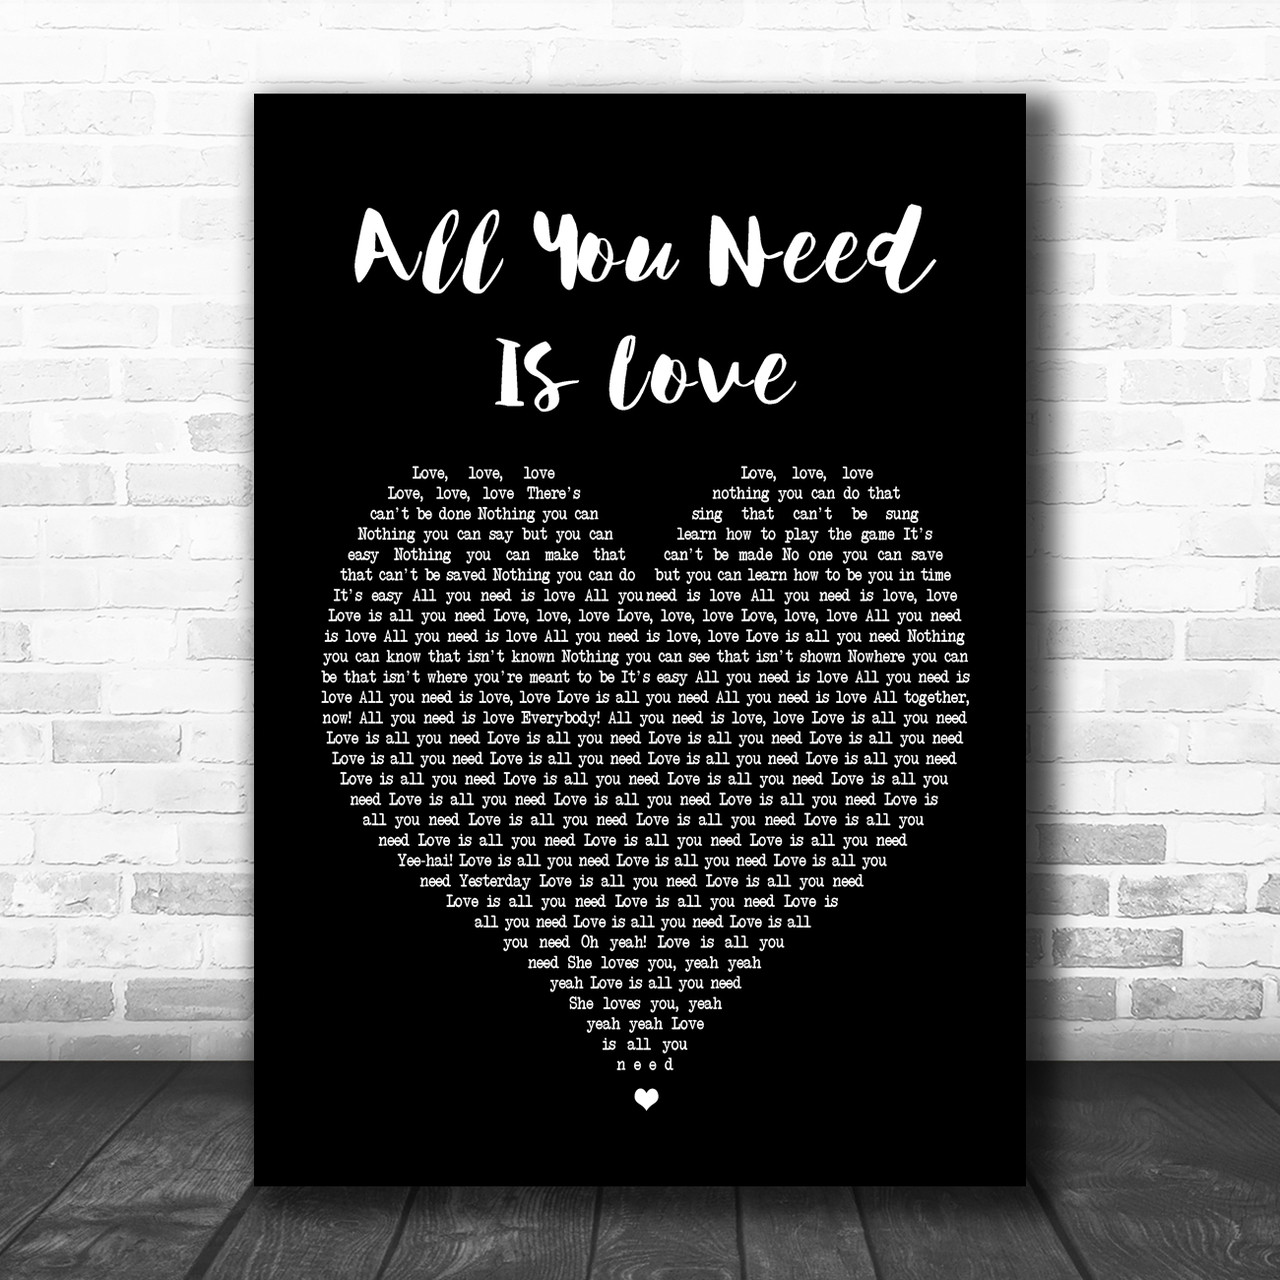 Anniversary The Beatles 'All You Need Is Love' Framed Song Lyrics Heart Print 